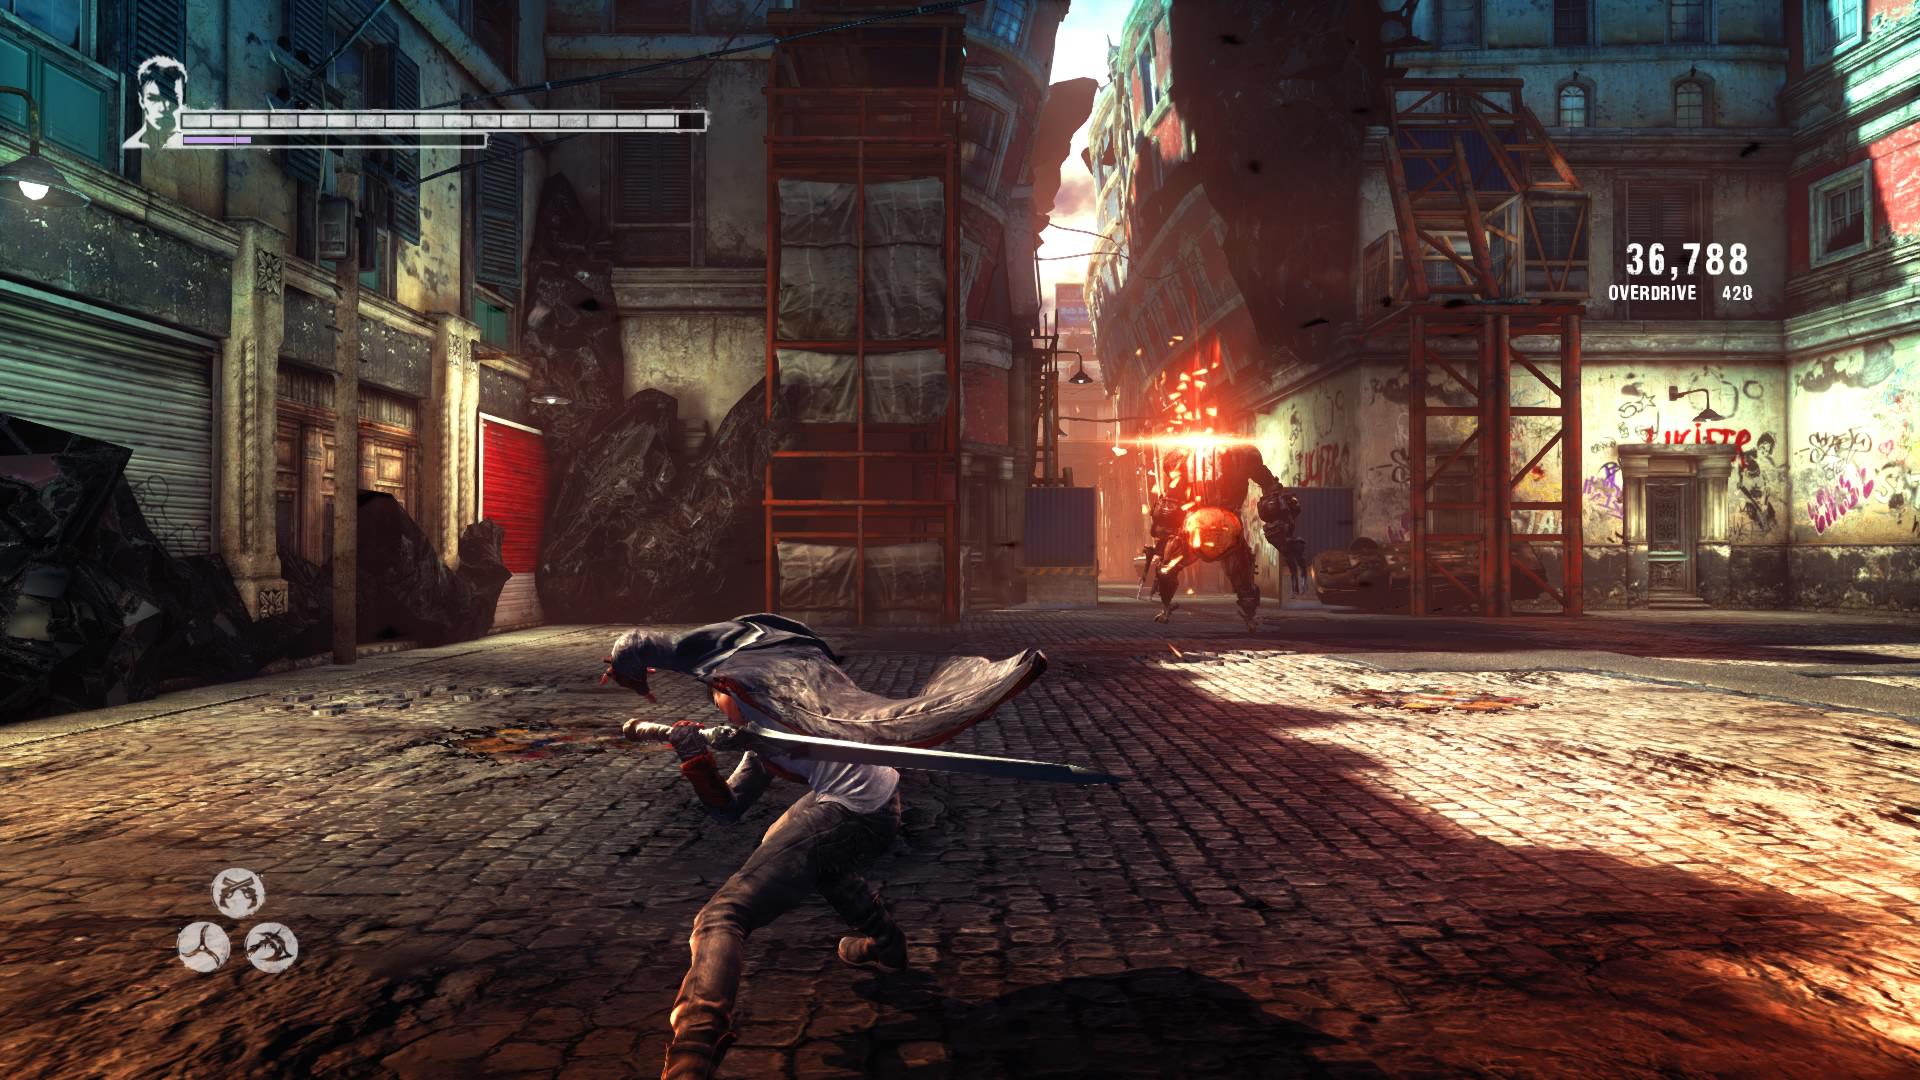 Dmc devil may cry definitive edition review 06